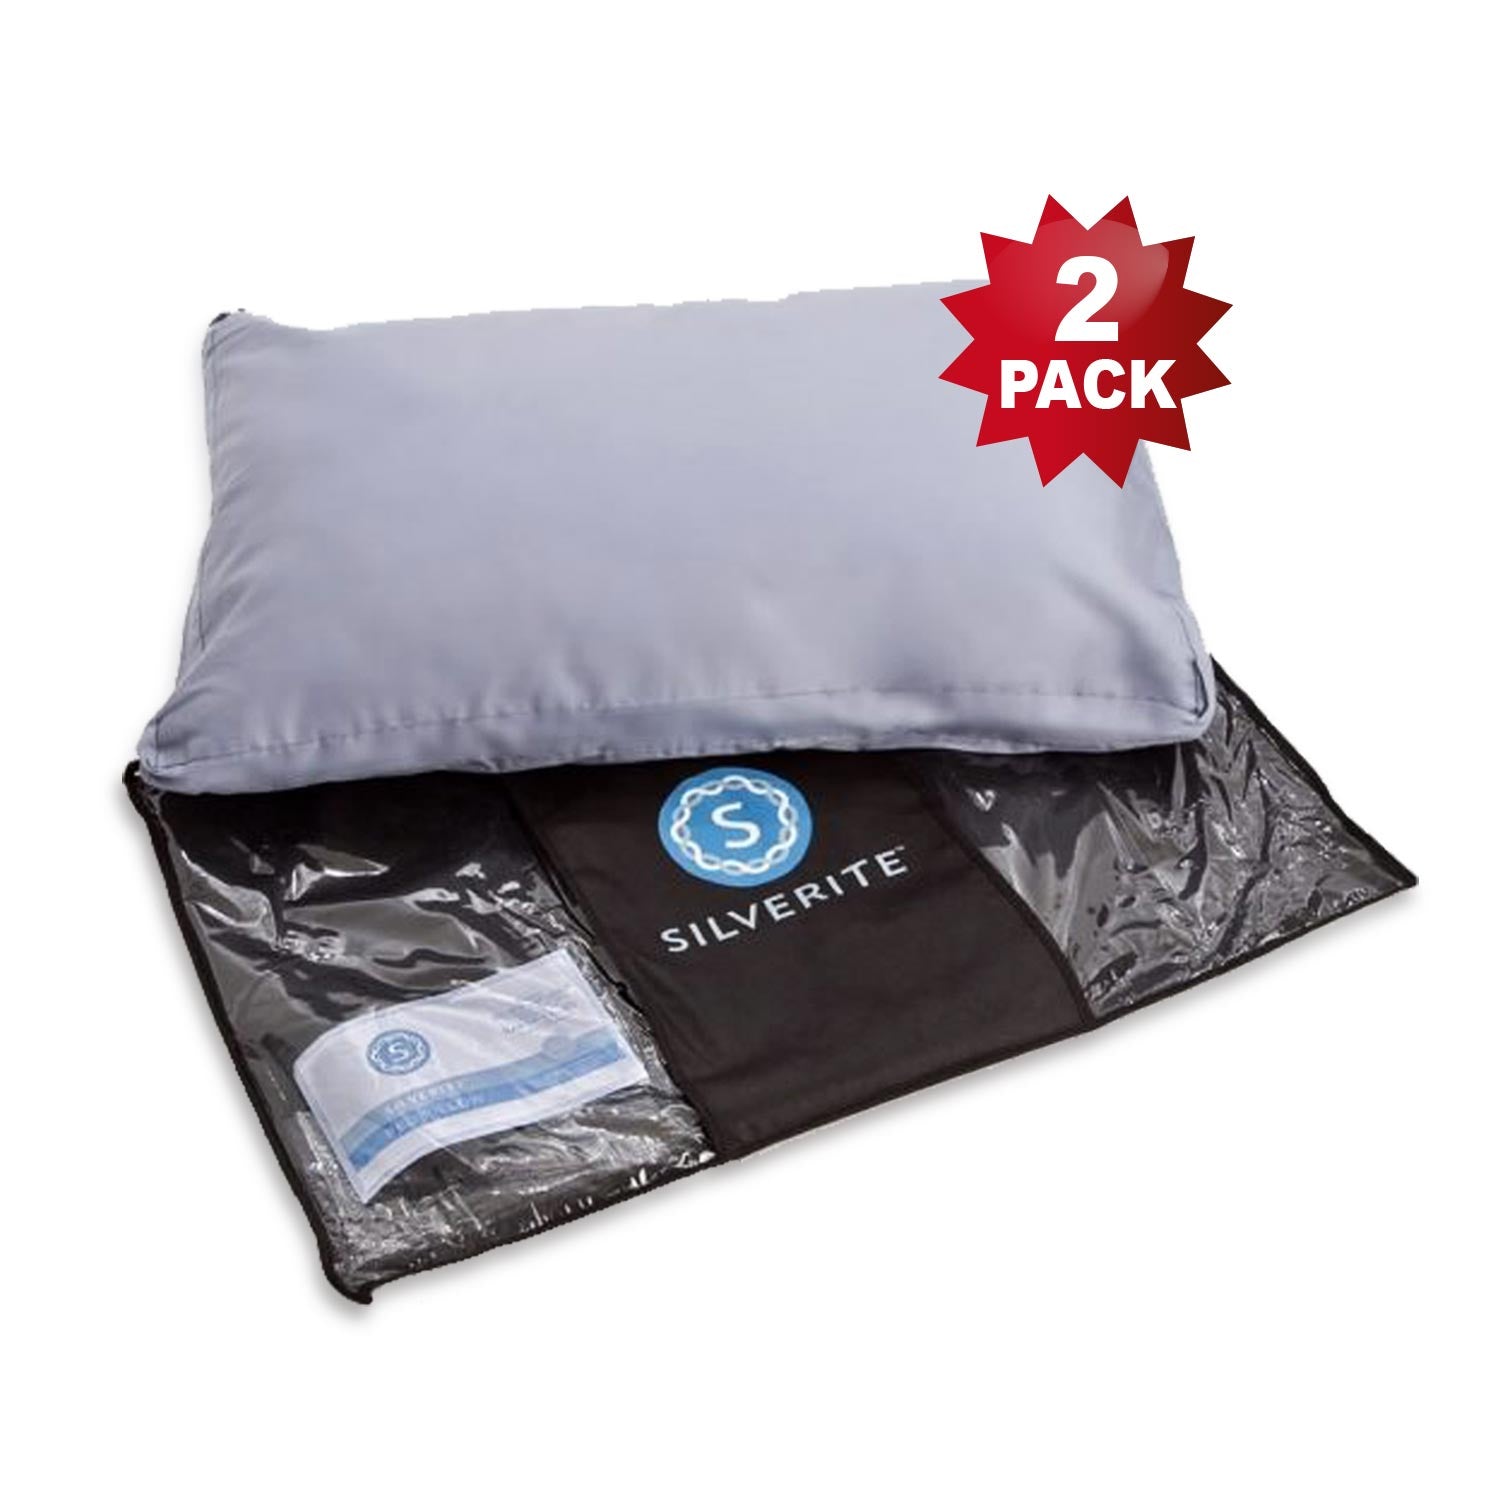 Silverite Perfect Bed Pillow (2-Pack)